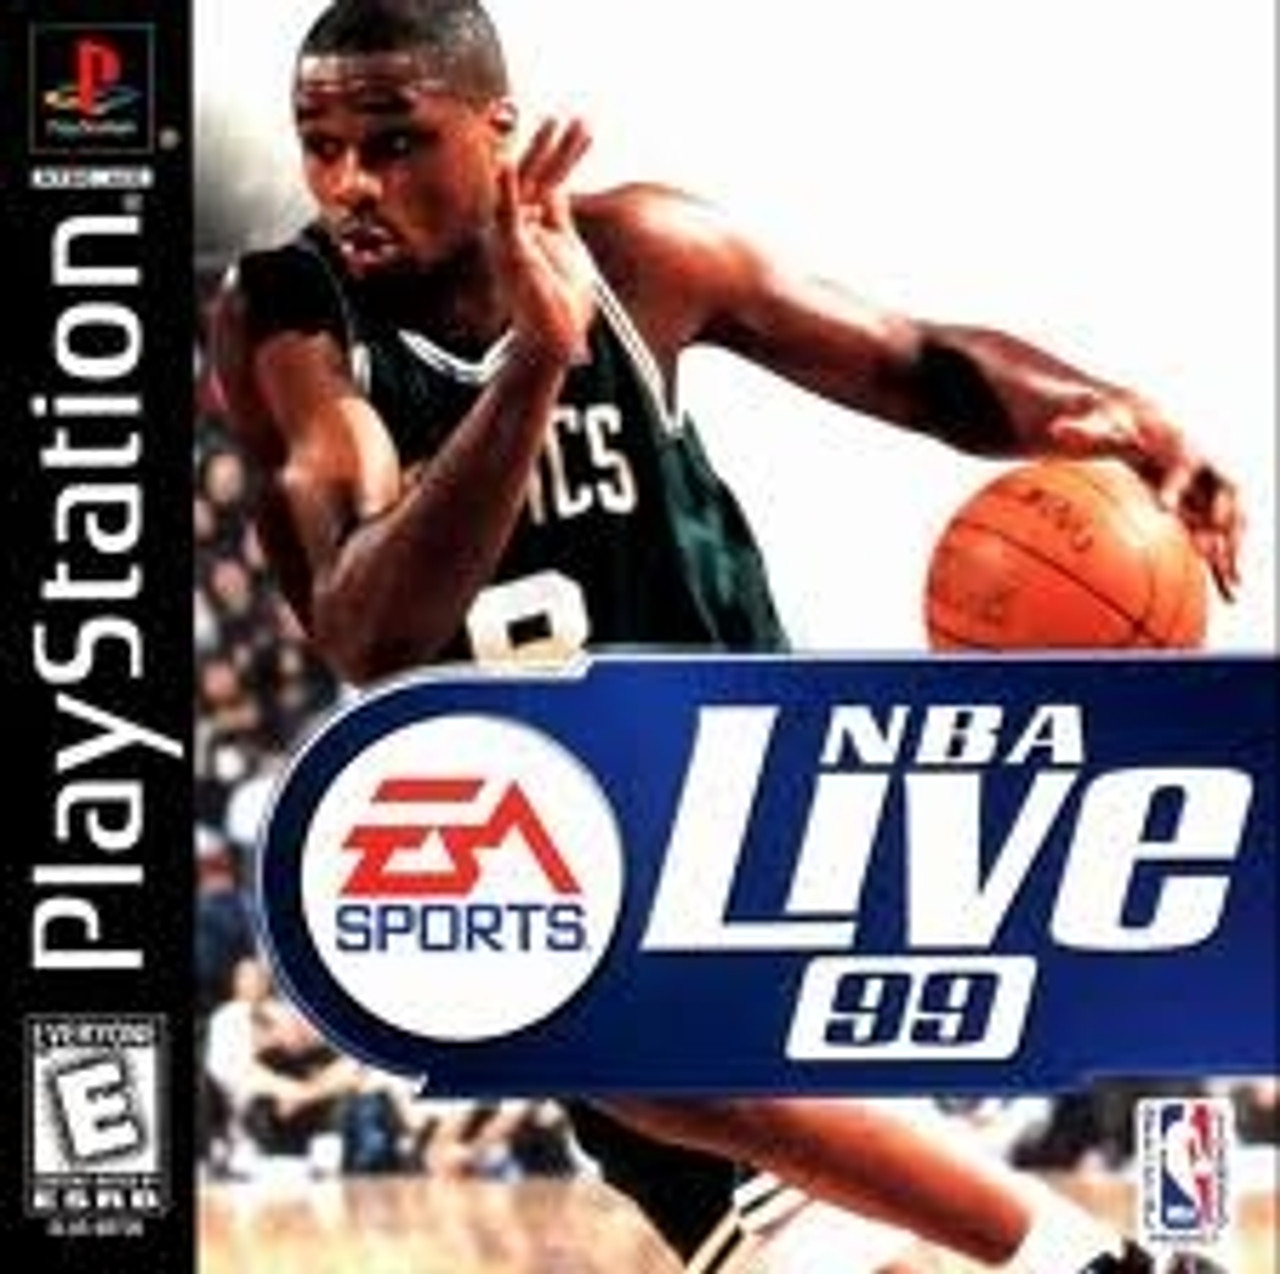 NBA Live 99 Playstation 1 PS1 Game For Sale DKOldies